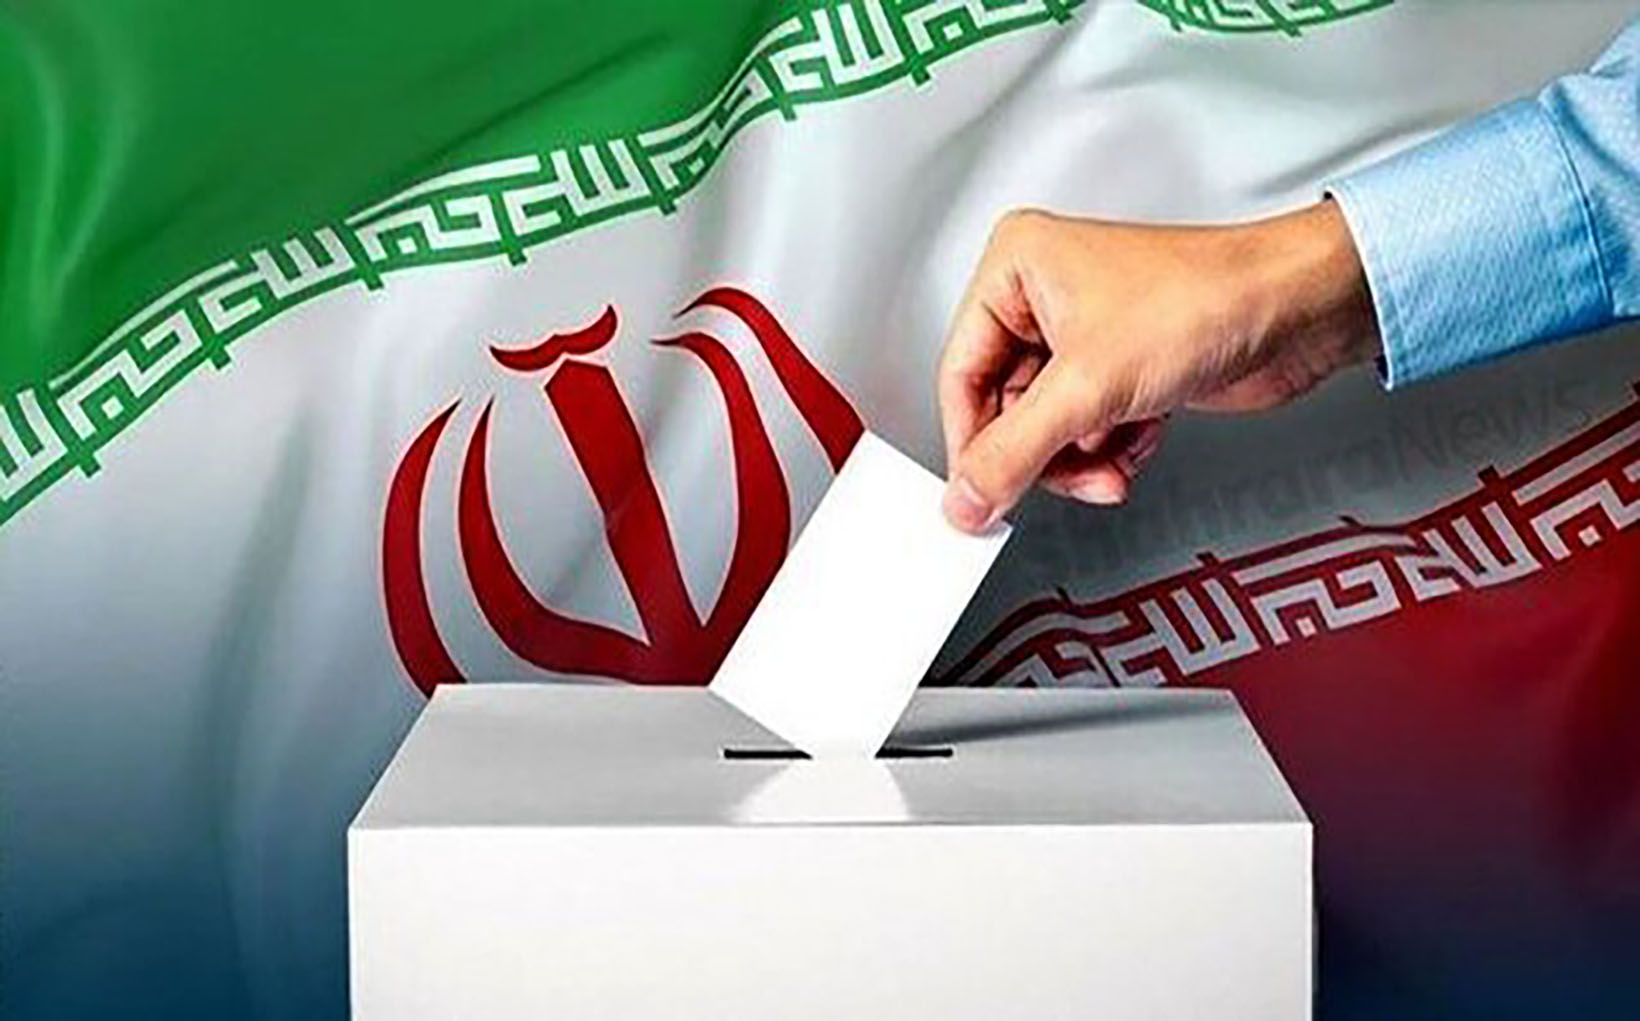 Preparations are in place for a just presidential election in Iran